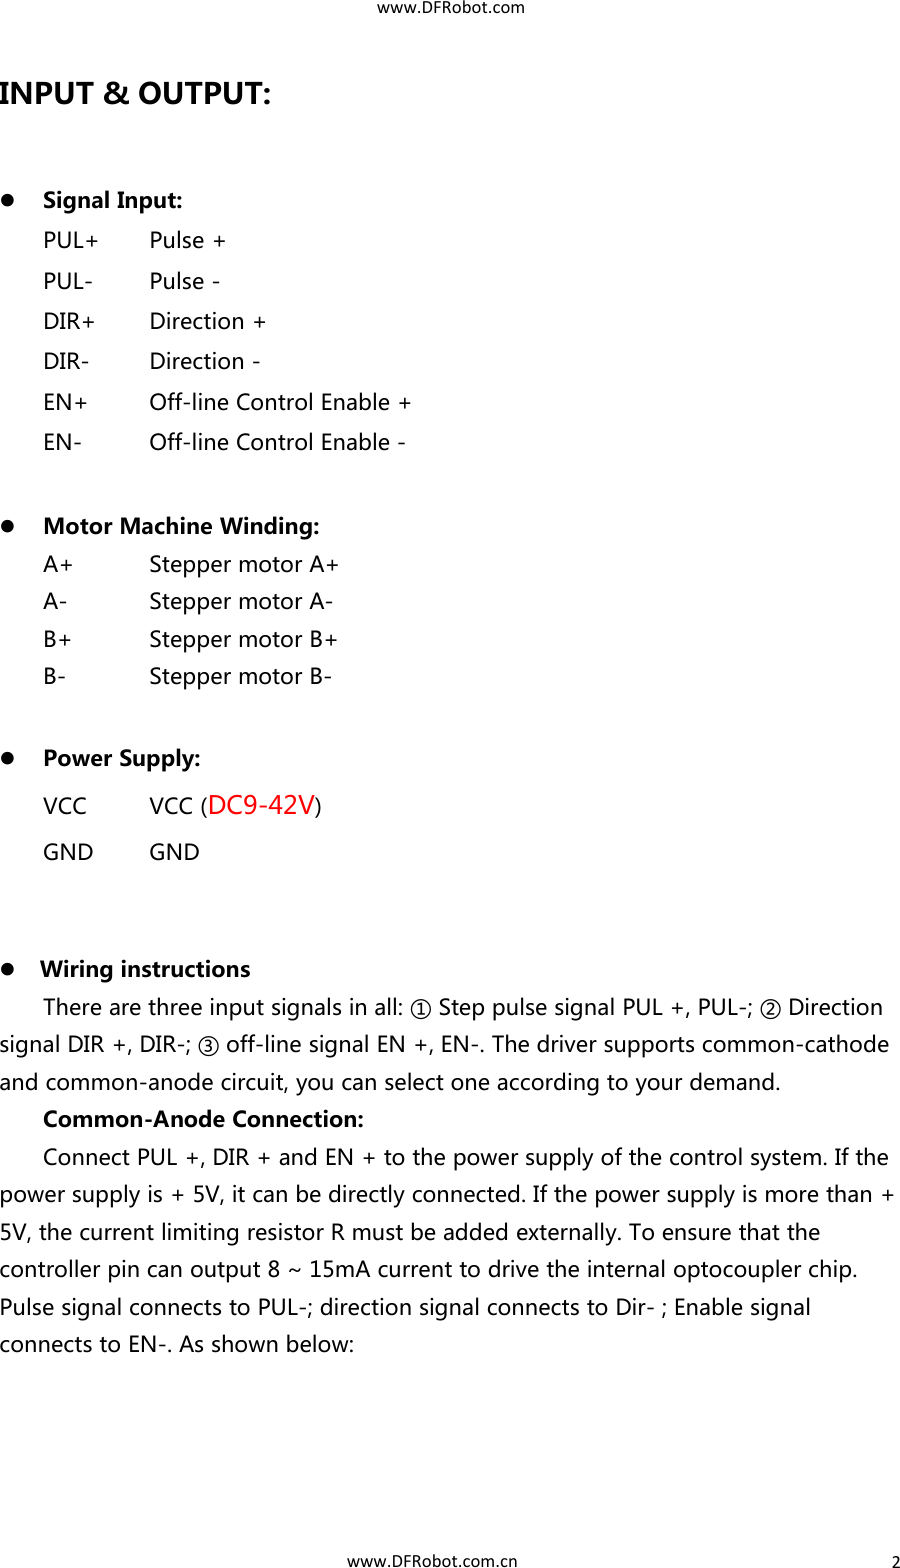 Page 5 of 11 - TB6600 User Guide V1.2